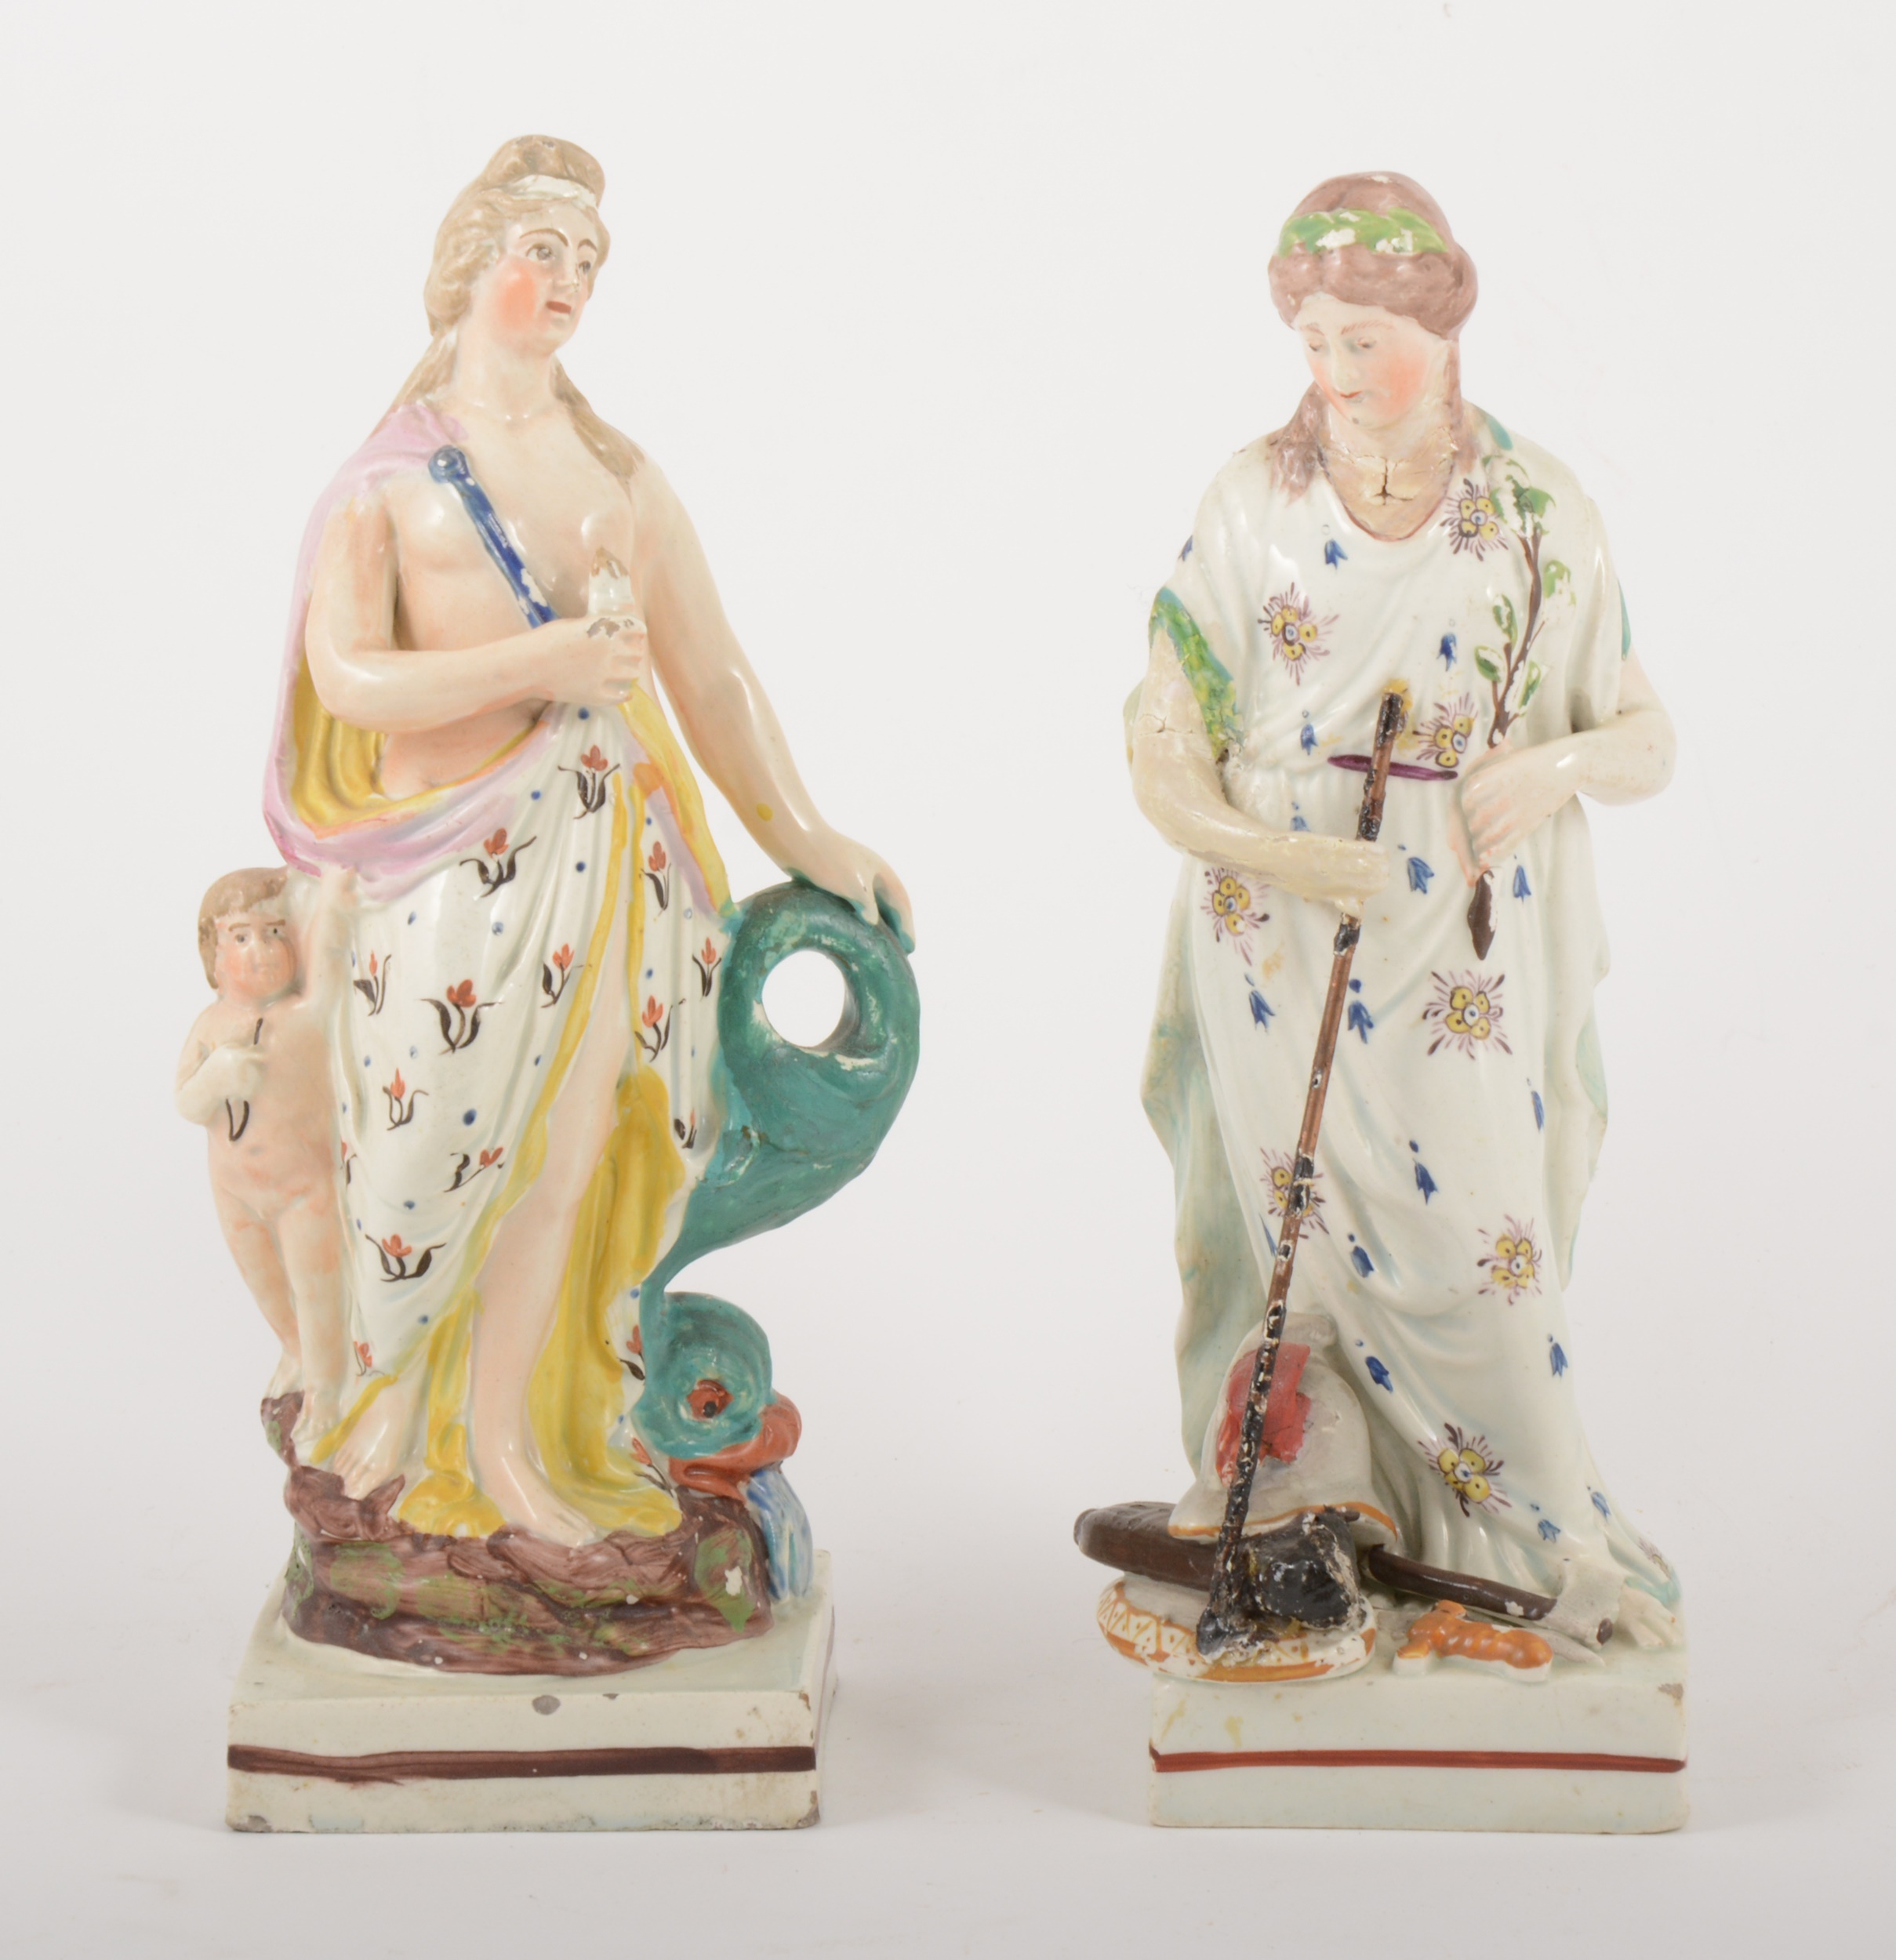 A Staffordshire earthenware figure of Venus with Cupid, in the manner of Enoch Wood, circa 1820